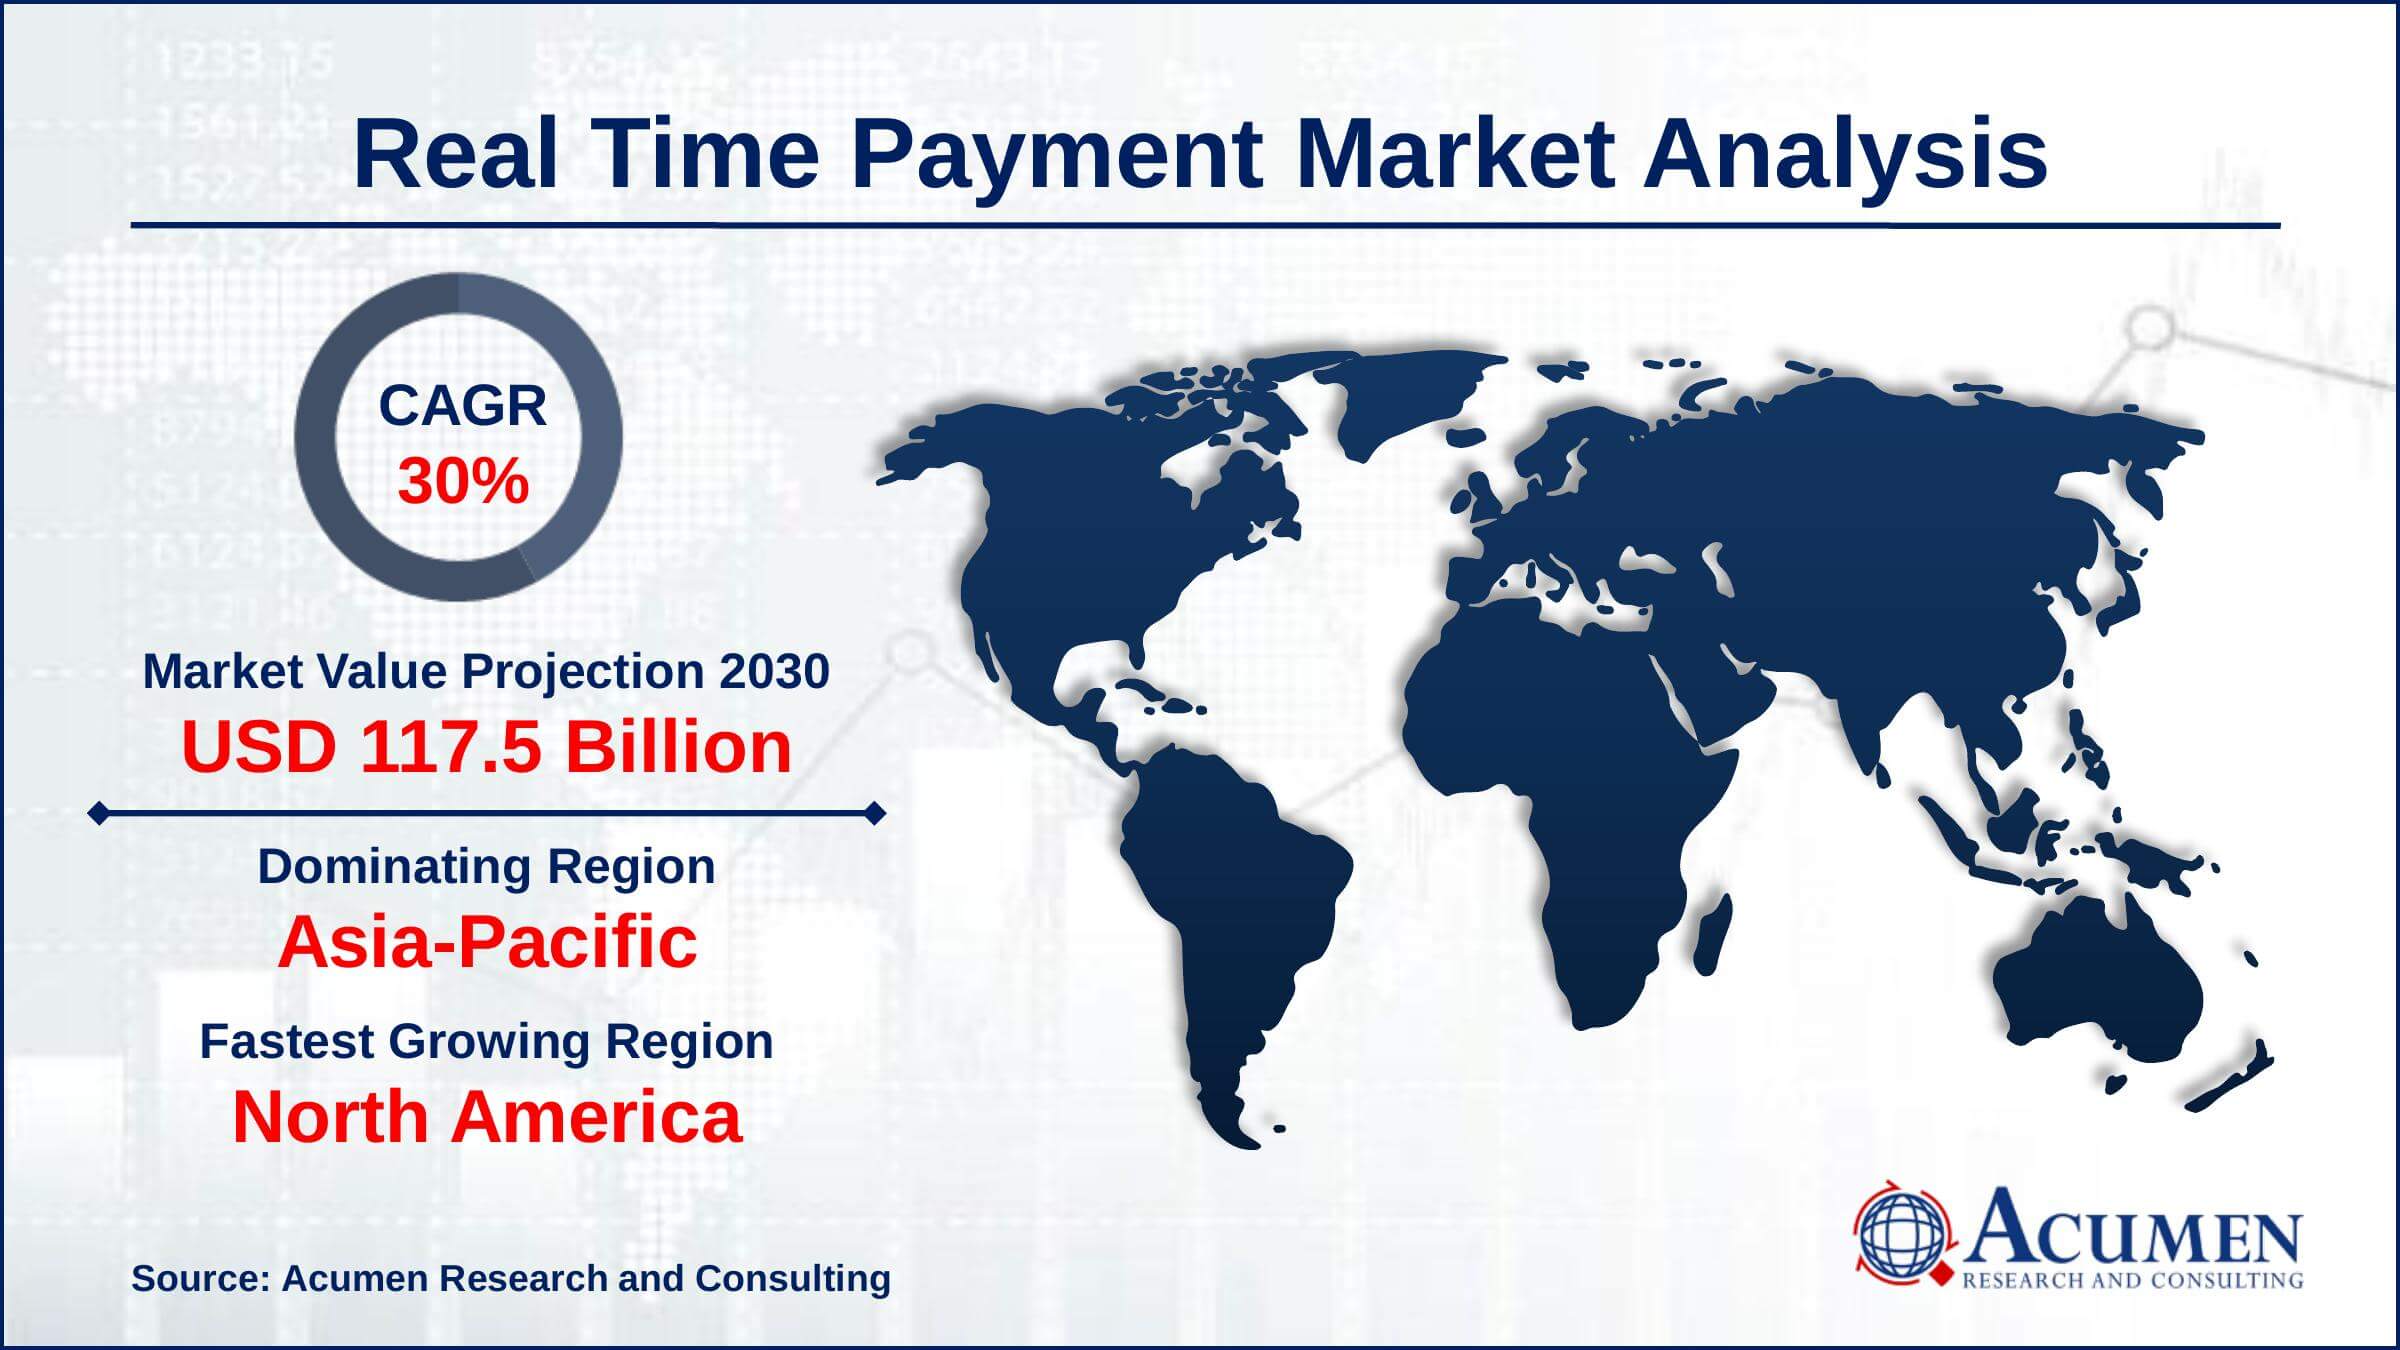 Asia-Pacific region led with more than 39% real time payment market share in 2021